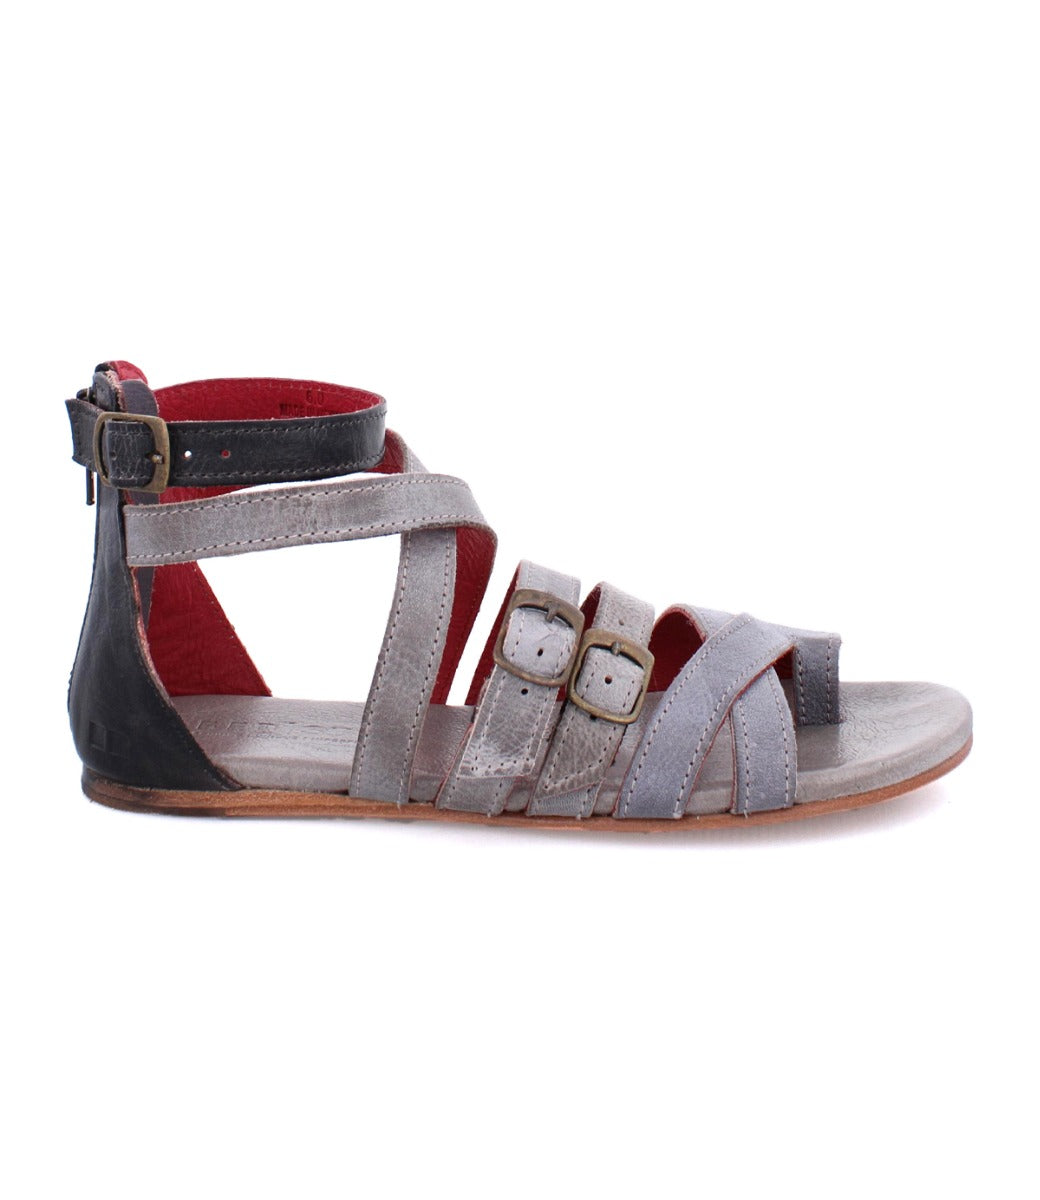 A women's Miya grey leather sandal by Bed Stu with straps and buckles.